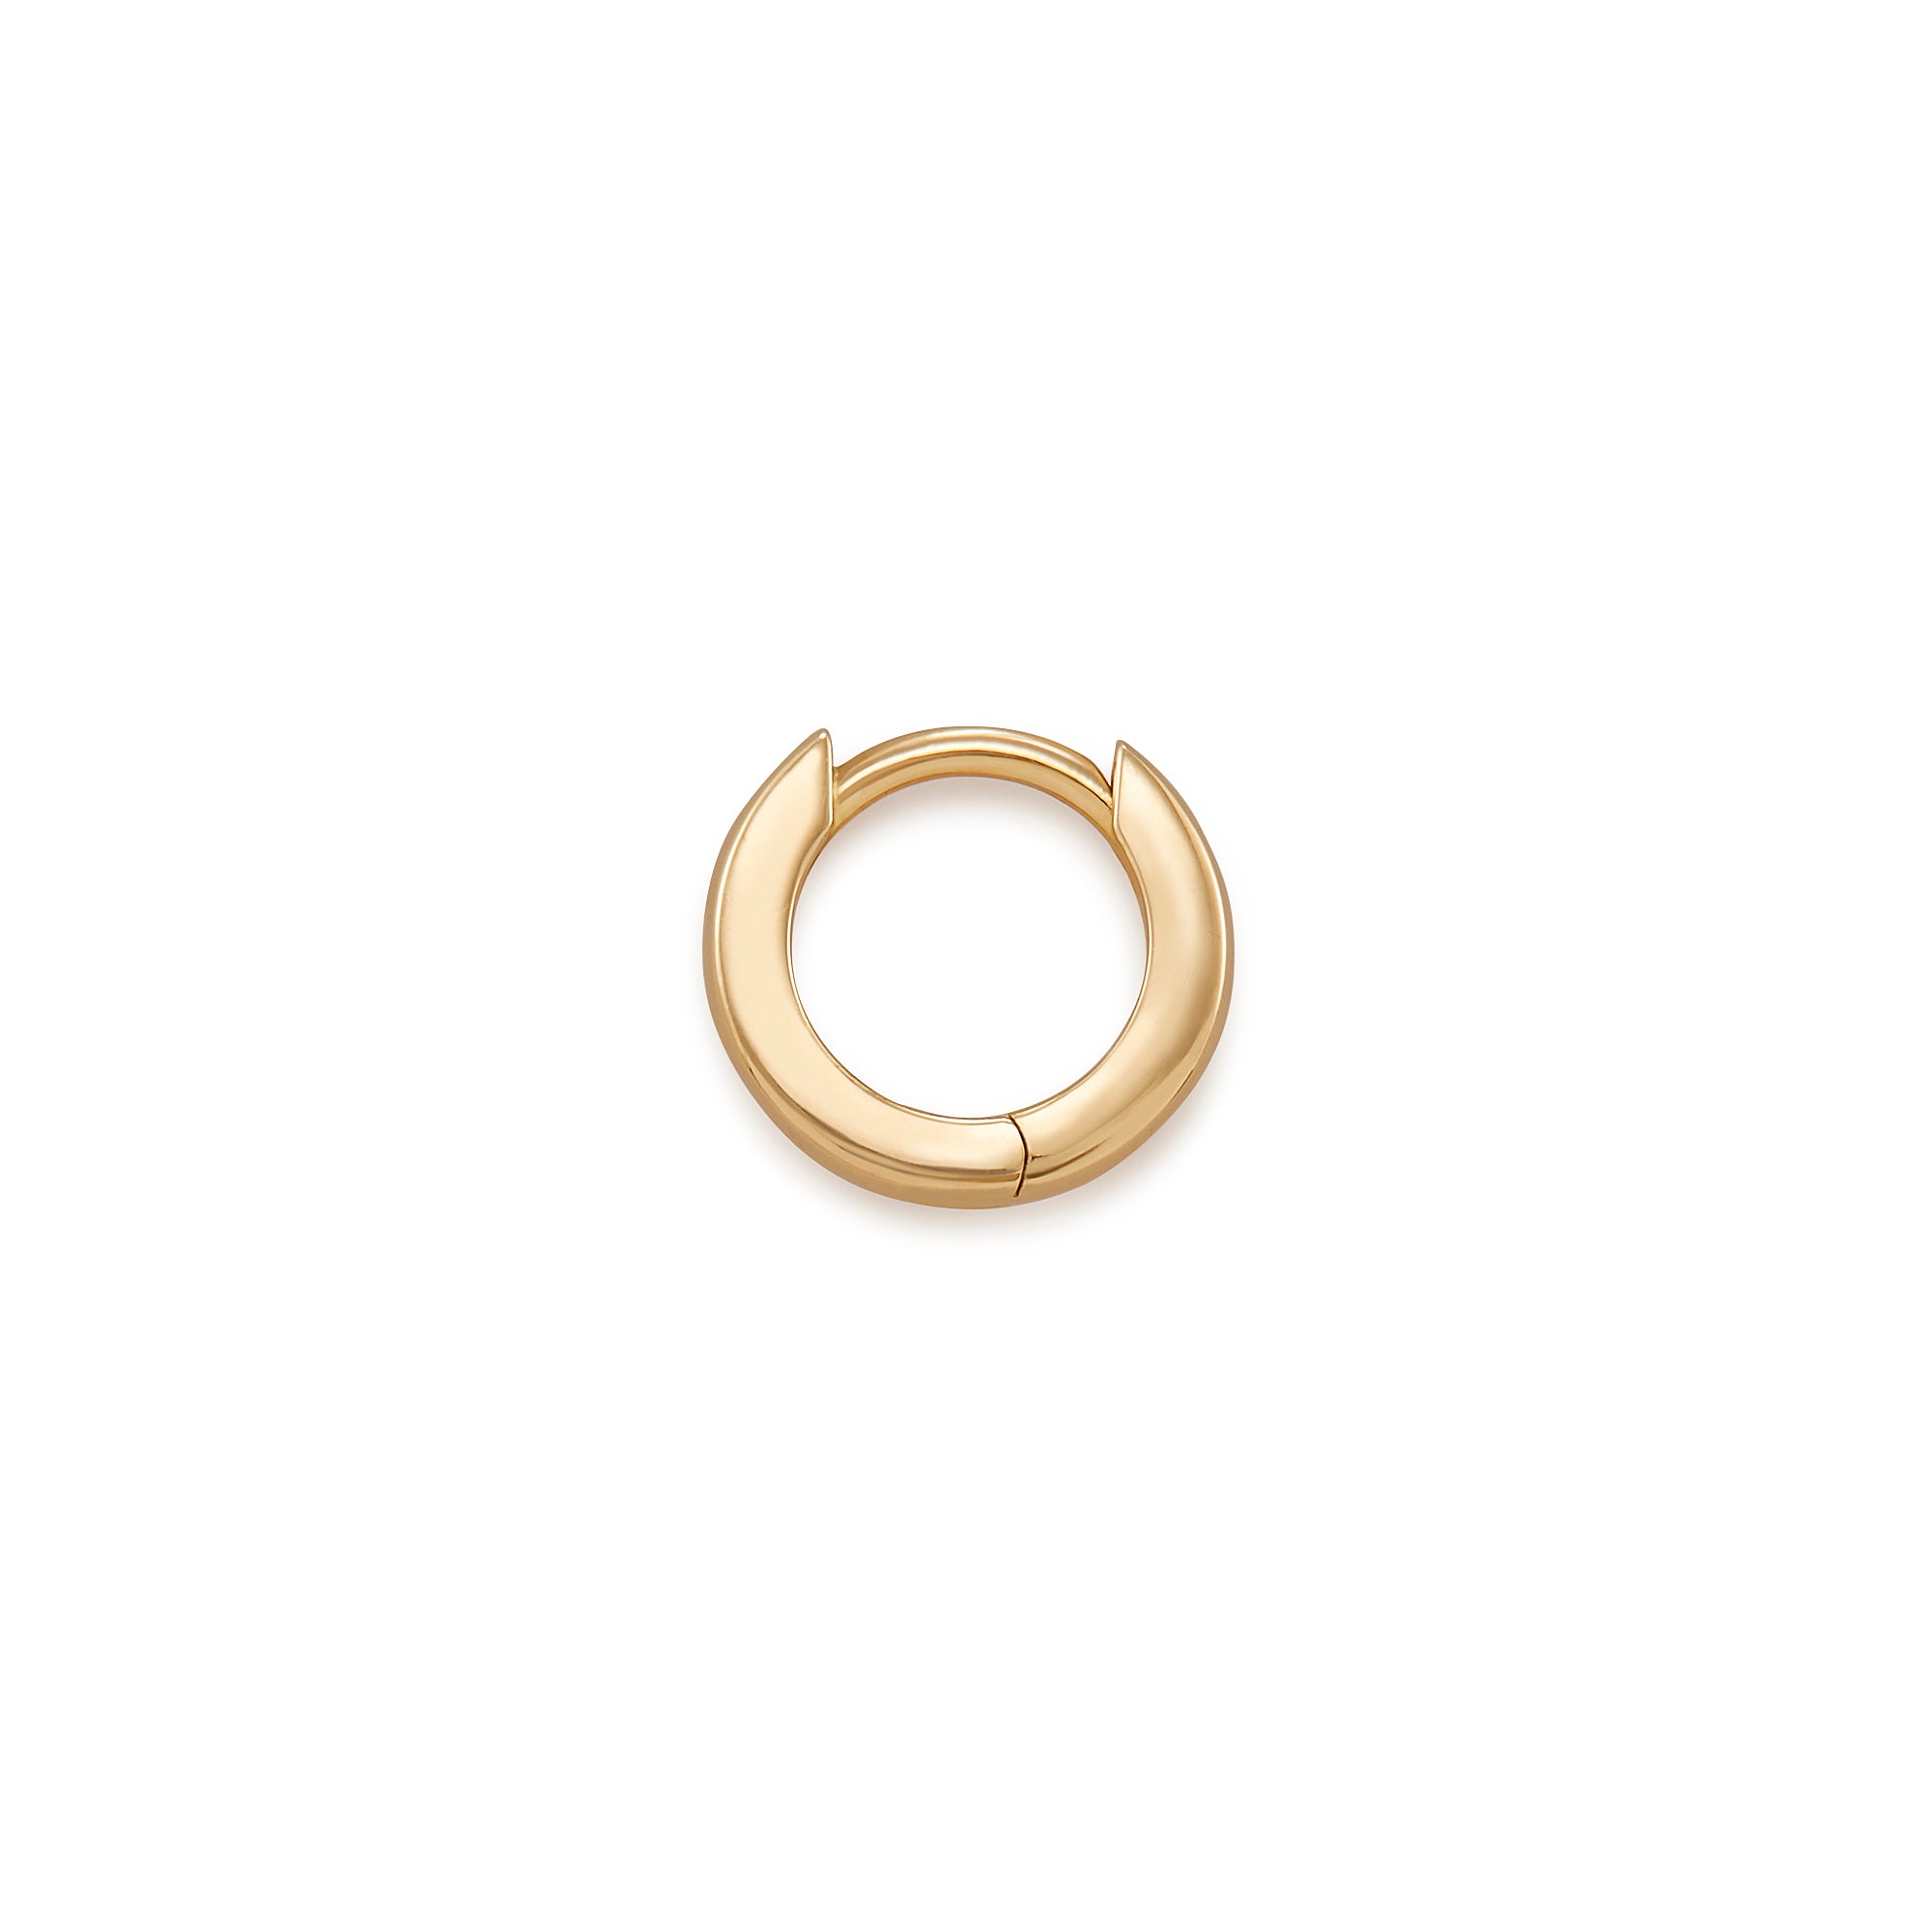 Simple Hinged Hoops featuring a secure closure and compact size in 14k gold, with your choice of two sizes, small or mini